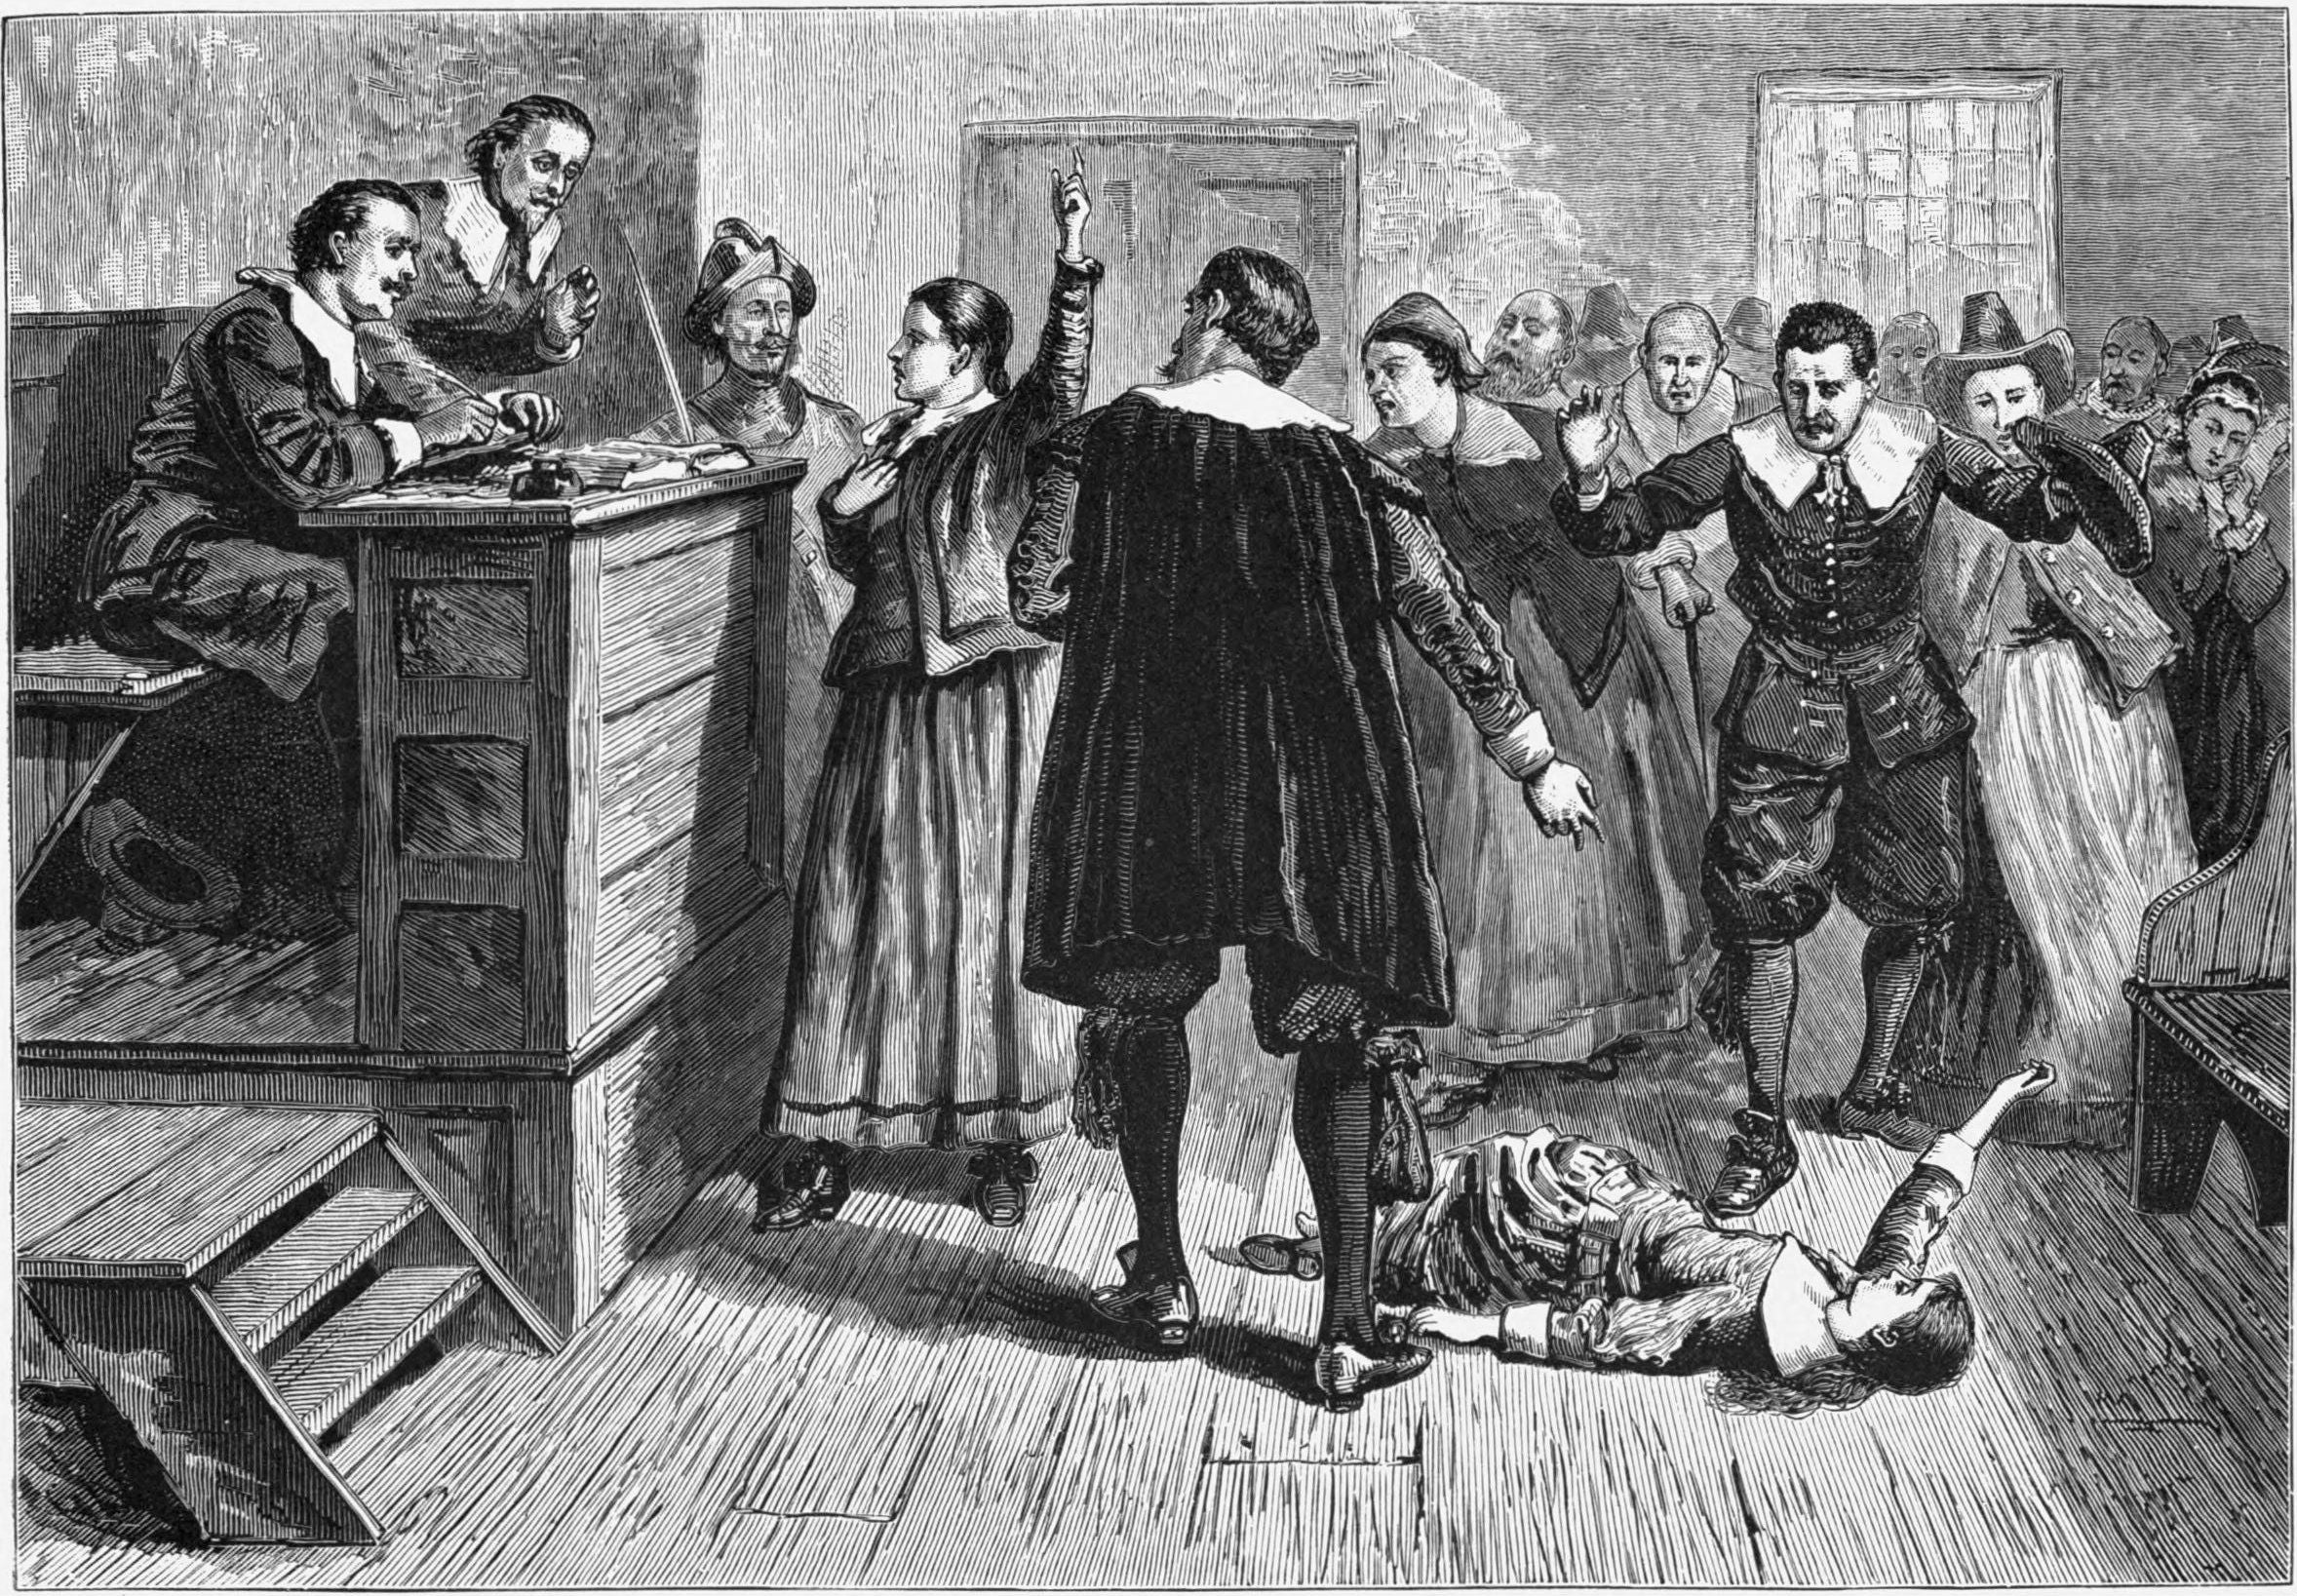 19 people were accused of witchcraft